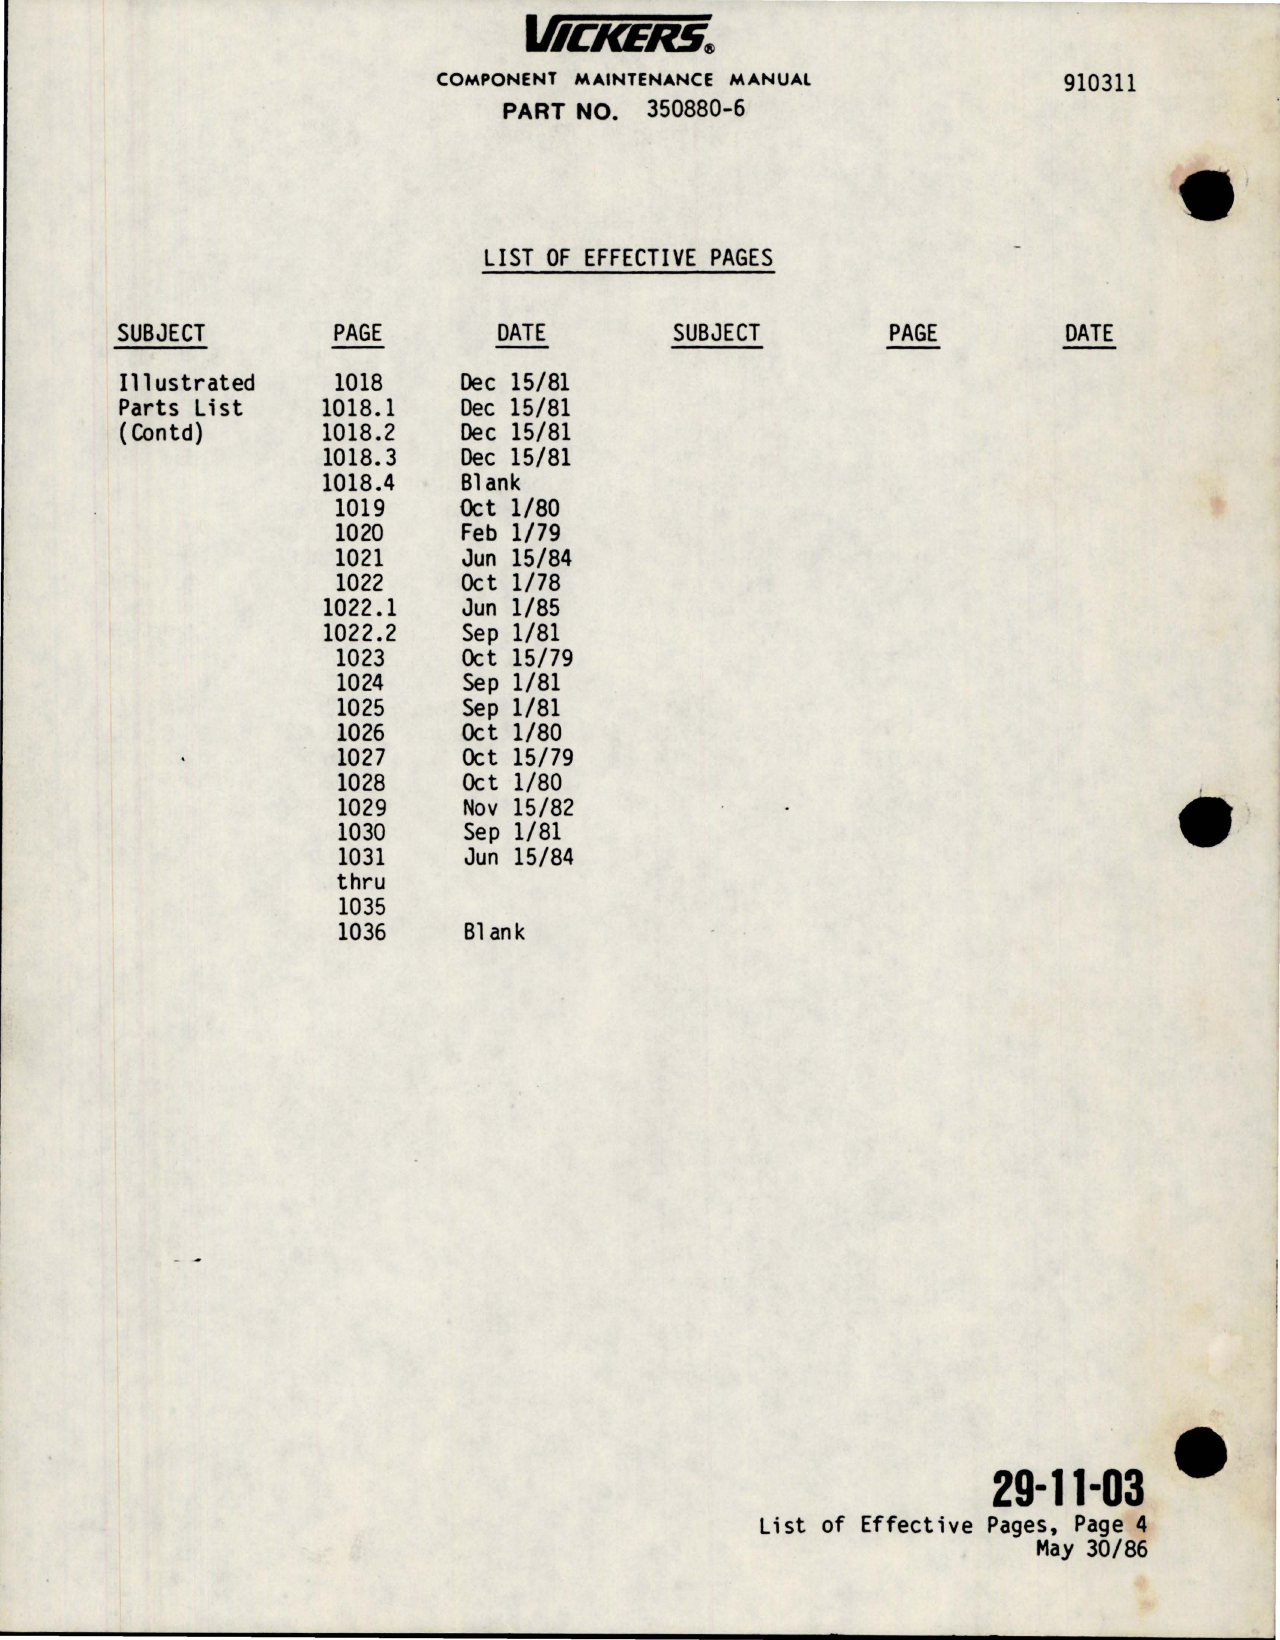 Sample page 8 from AirCorps Library document: Maintenance Manual with Parts List for Variable Displacement Hydraulic Pump - Parts 350880-6 and 623272